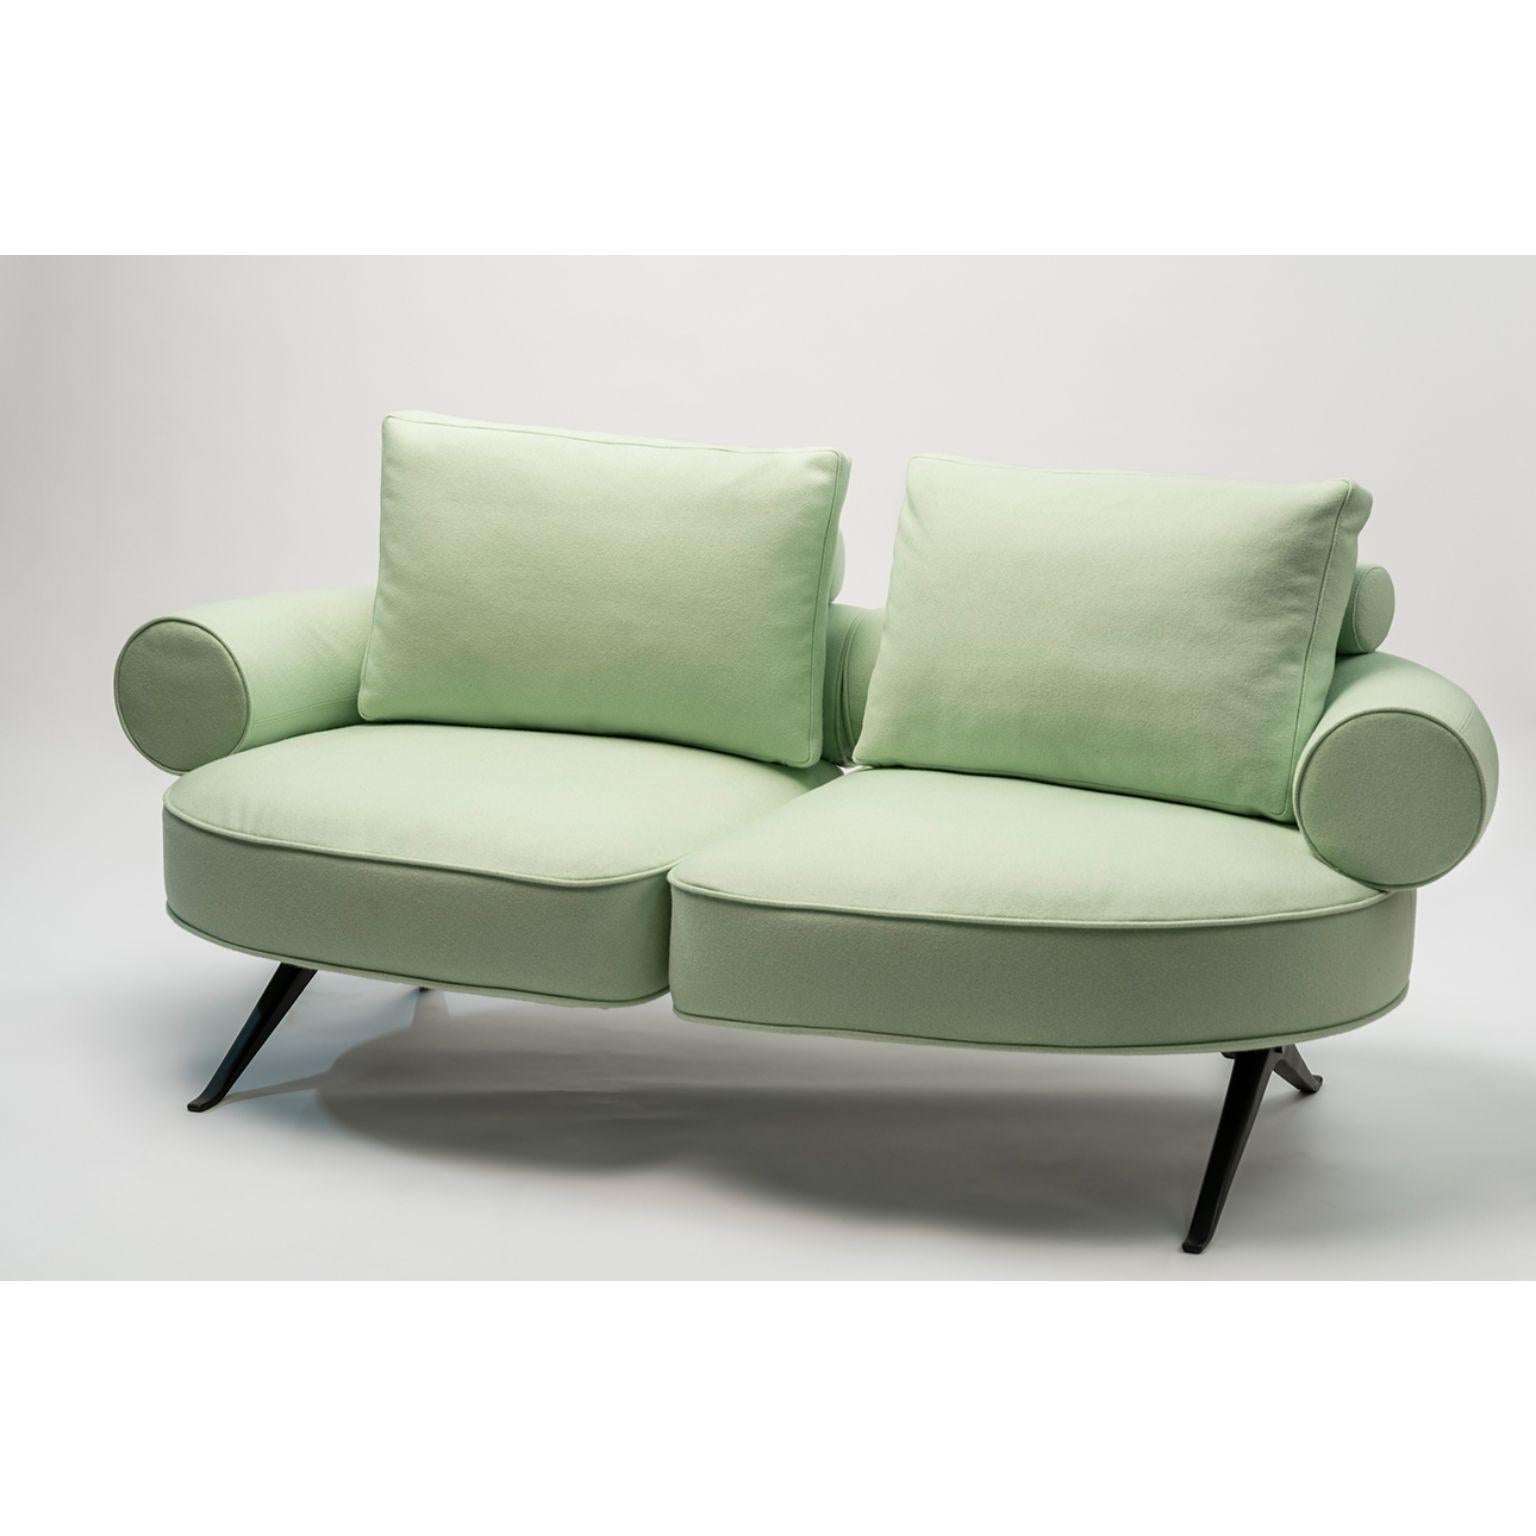 Luizet 2 seats modular sofa by Luca Nichetto
Materials: Upholstery: Fabric 
Structure: Powder-coated metal, cast aluminum legs

Dimensions: W 177 x D 89 x H 82 cm
 HS 42.5 cm.

  

As in a game that frees the imagination and possibilities, Luizet is